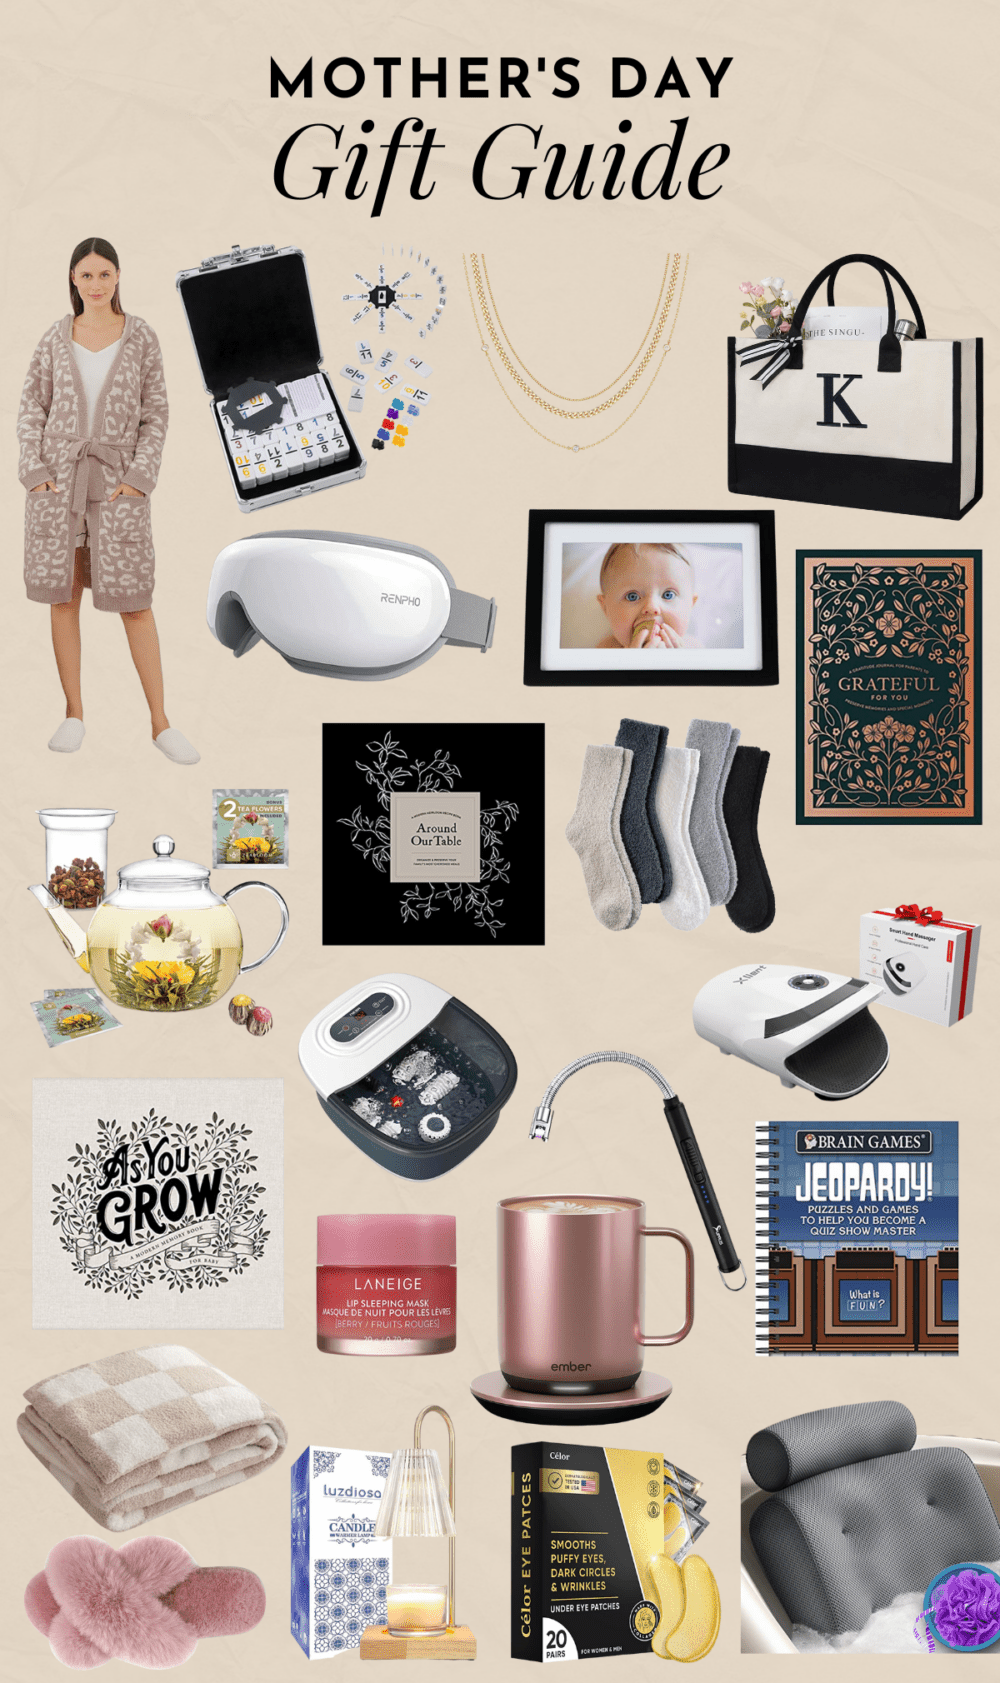 The 30 Best Gifts for Moms of 2023